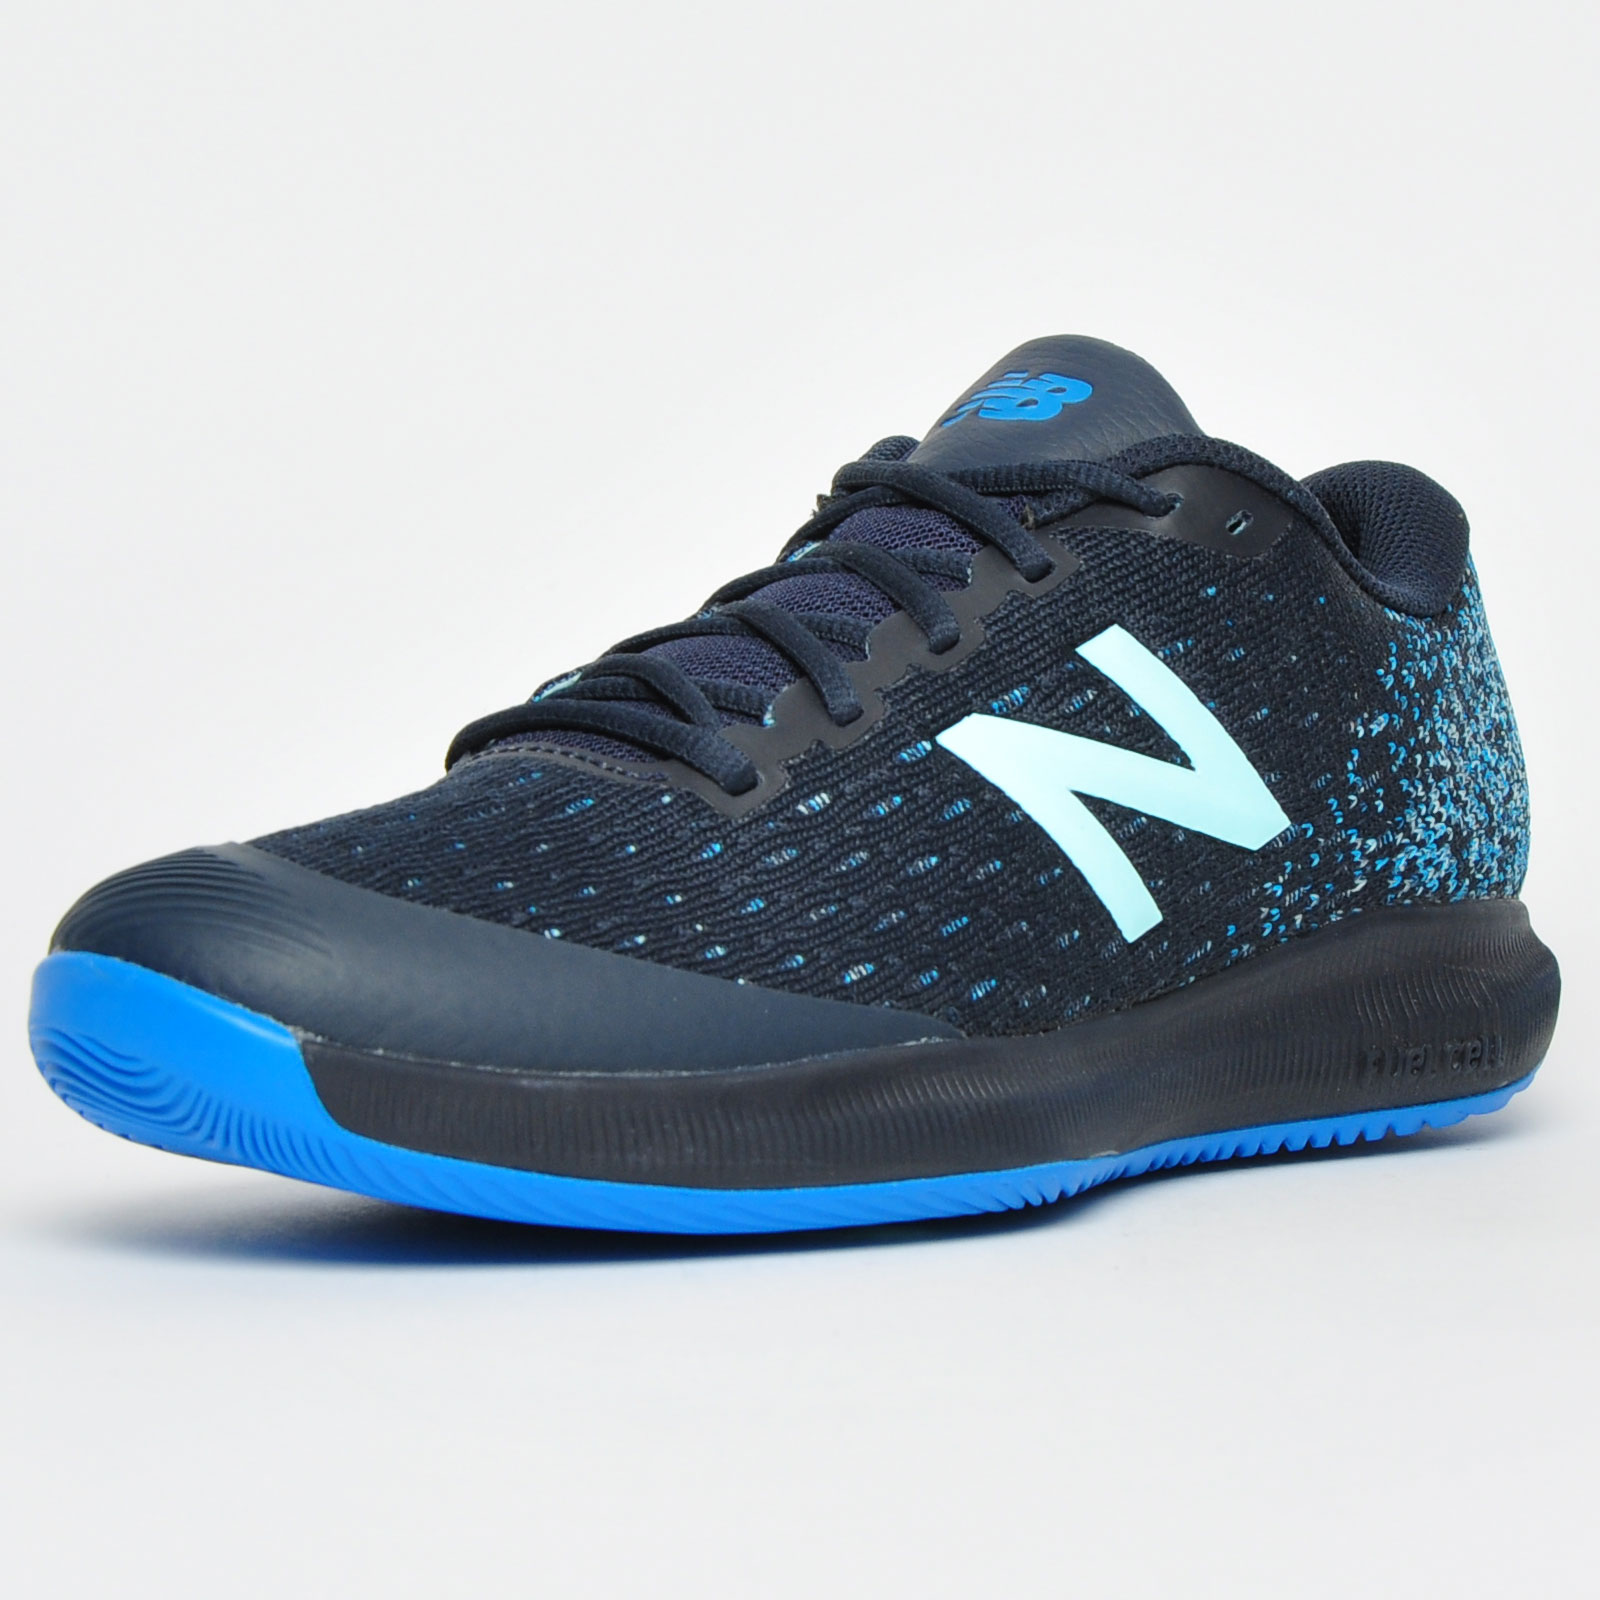 New Balance 996 v4 Mens Court Tennis Fitness Gym Shoes Trainers Navy | eBay